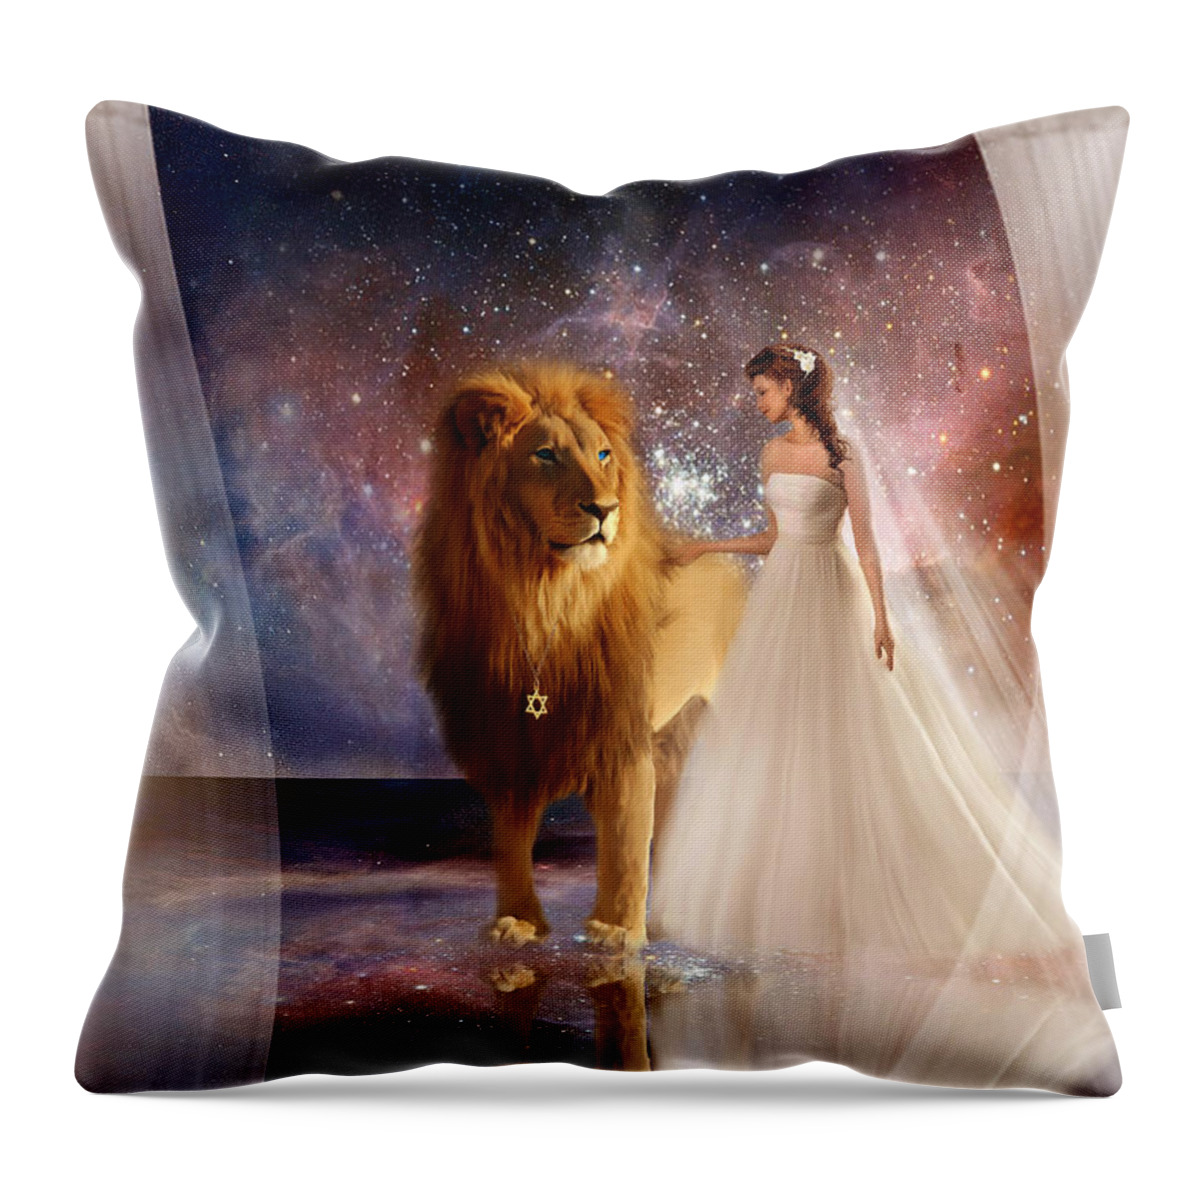 In His Presence Throw Pillow featuring the digital art In His Presence #1 by Jennifer Page